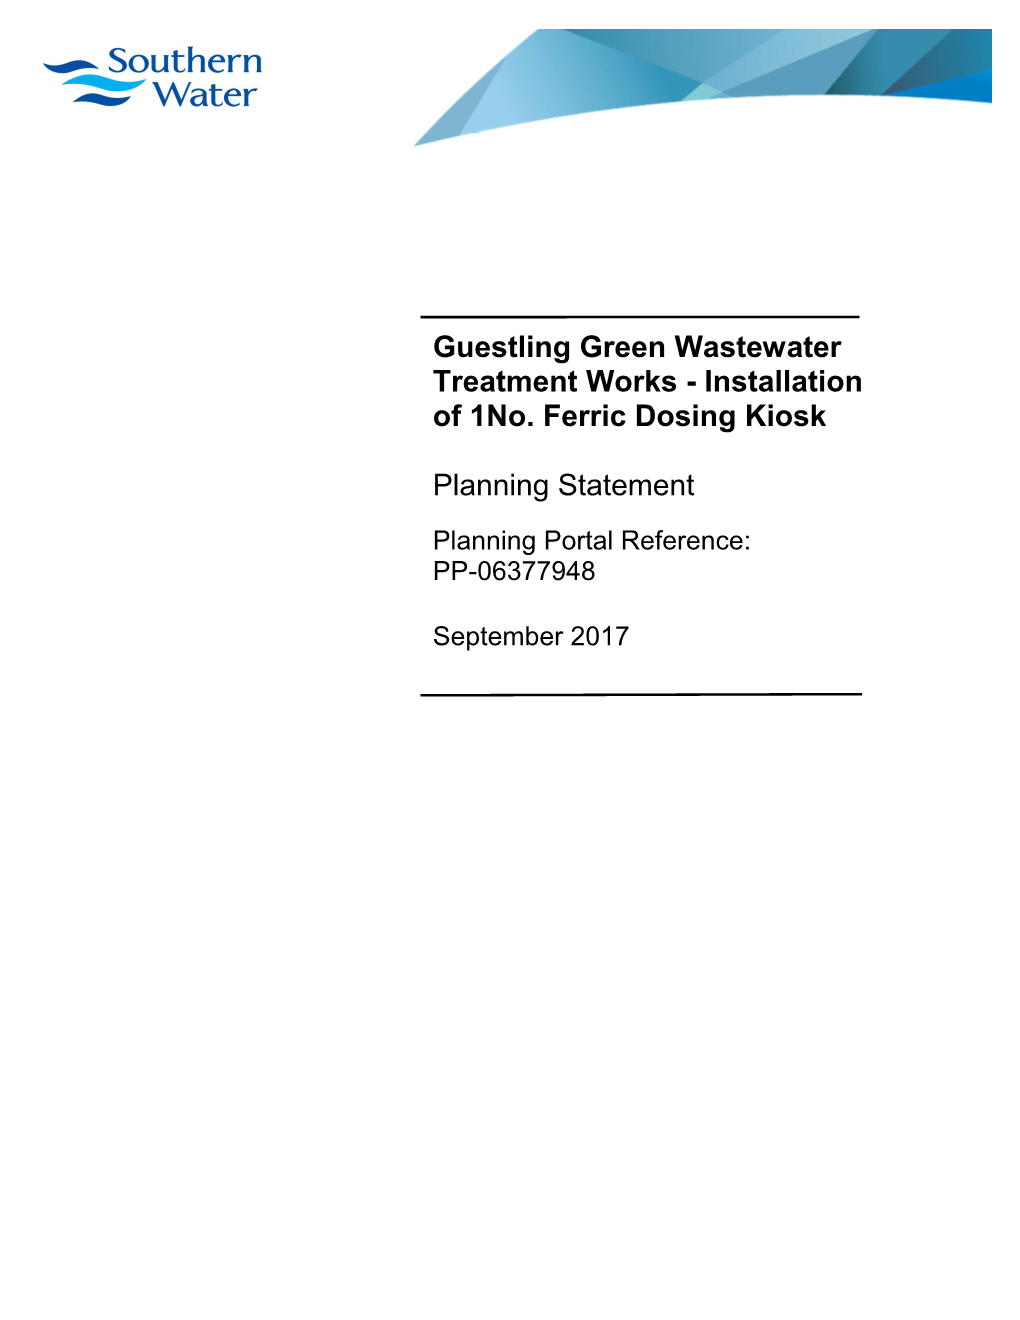 Guestling Green Wastewater Treatment Works - Installation of 1No